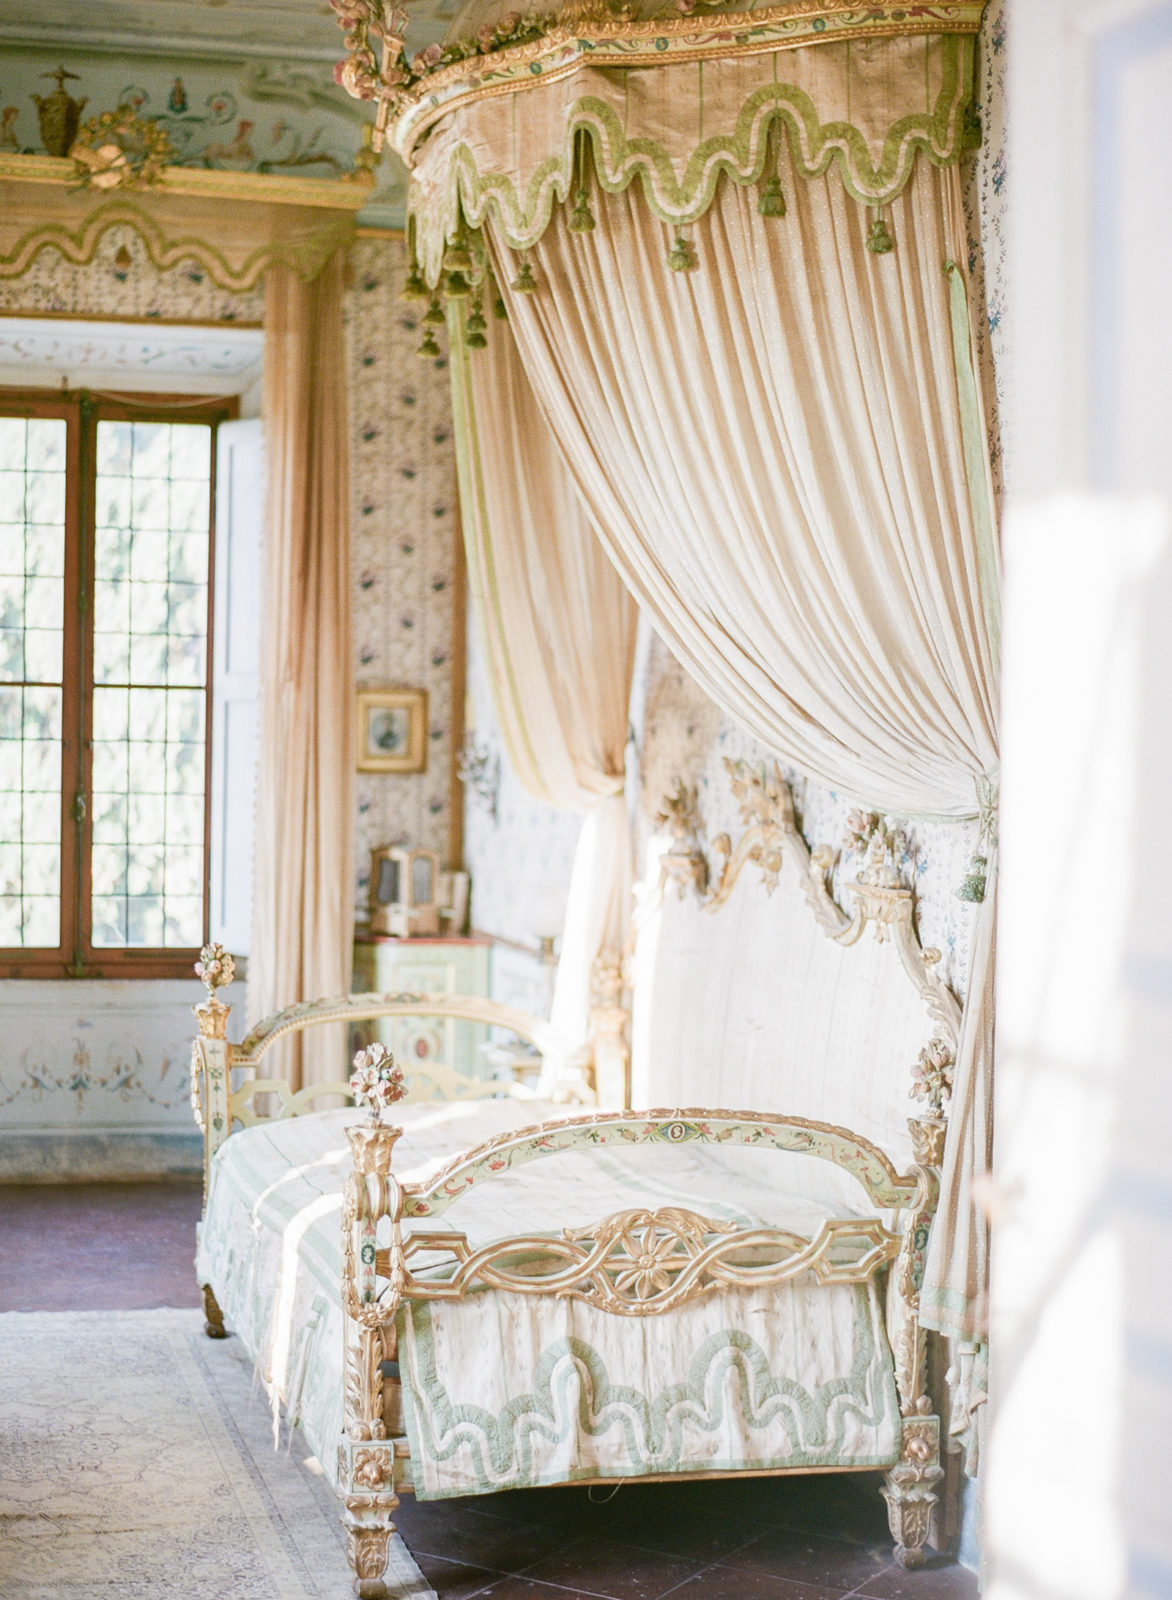 Villa di Geggiano Wedding Photographer | Molly Carr Photography | Tuscany Destination Wedding | Luxury Wedding Photographer Italy | Film Photographer | Fete in France | Fete Event Planning | Isibeal Studio